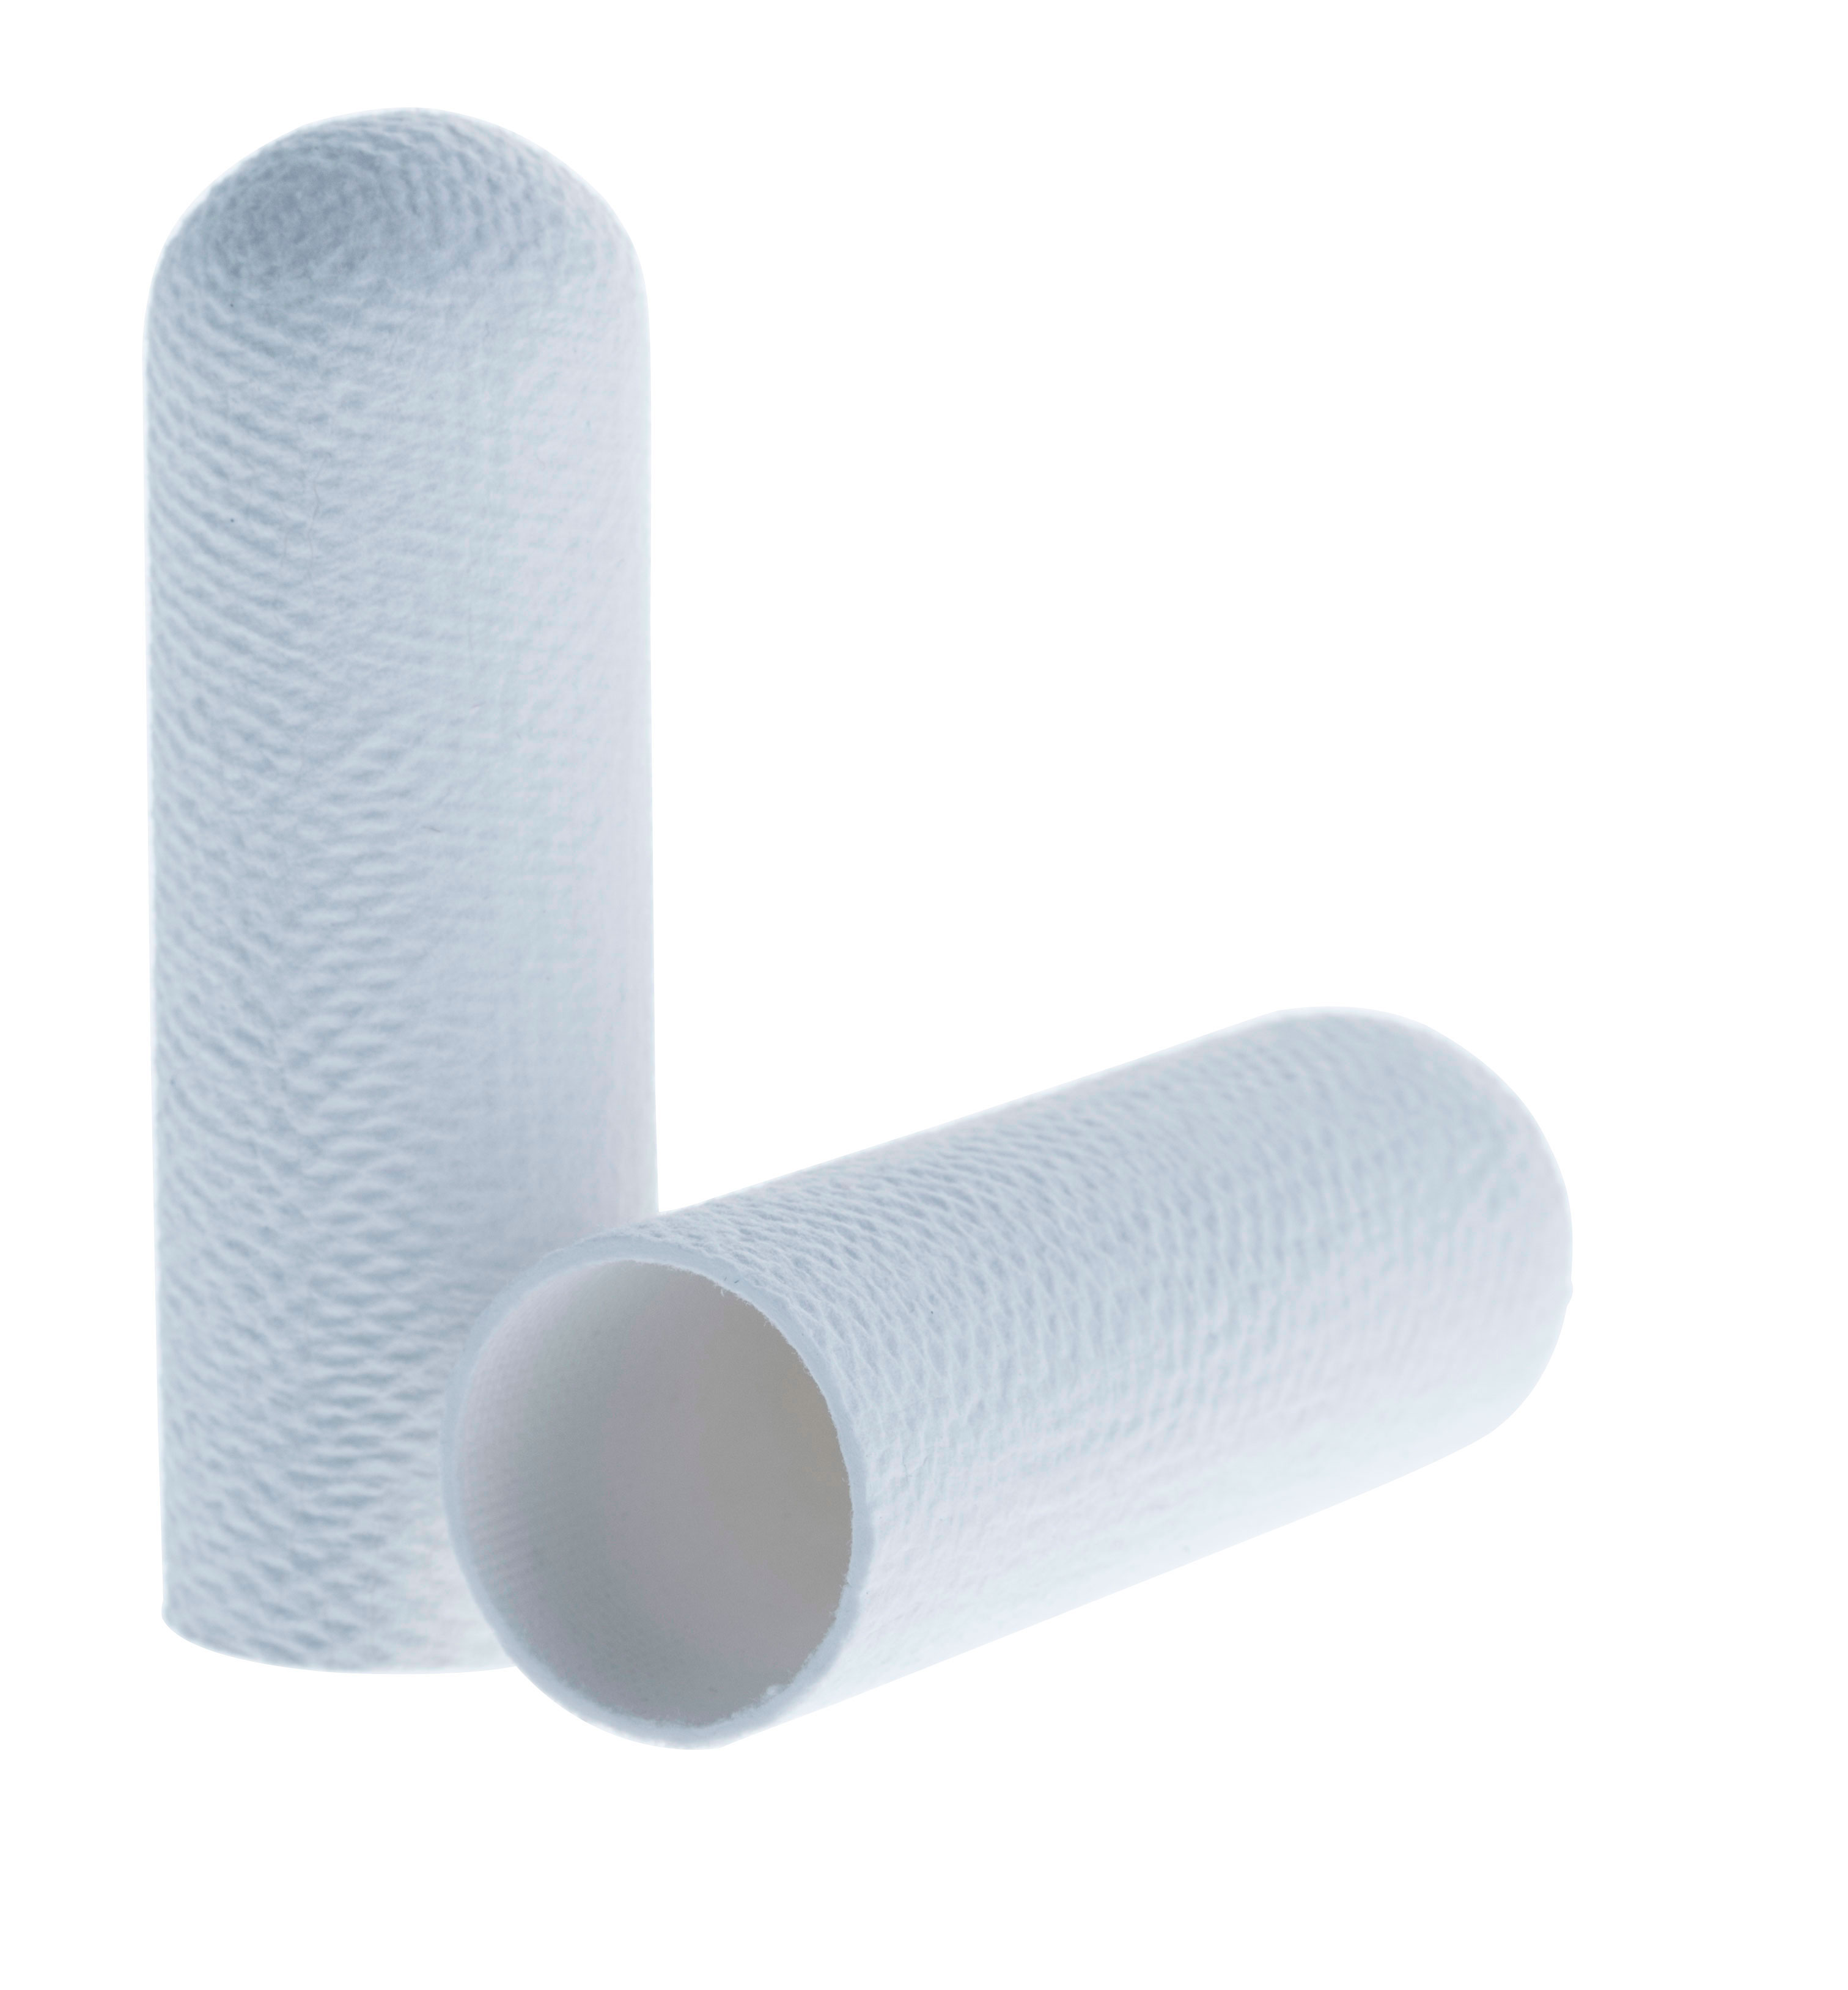 Cellulose extraction thimbles for Soxhlet extraction. SCHARLAU. Standard cellulose cartridge. Dim. Øxlength: 26x100mm. Particle retention in liquid: Nom. 8-15 microns